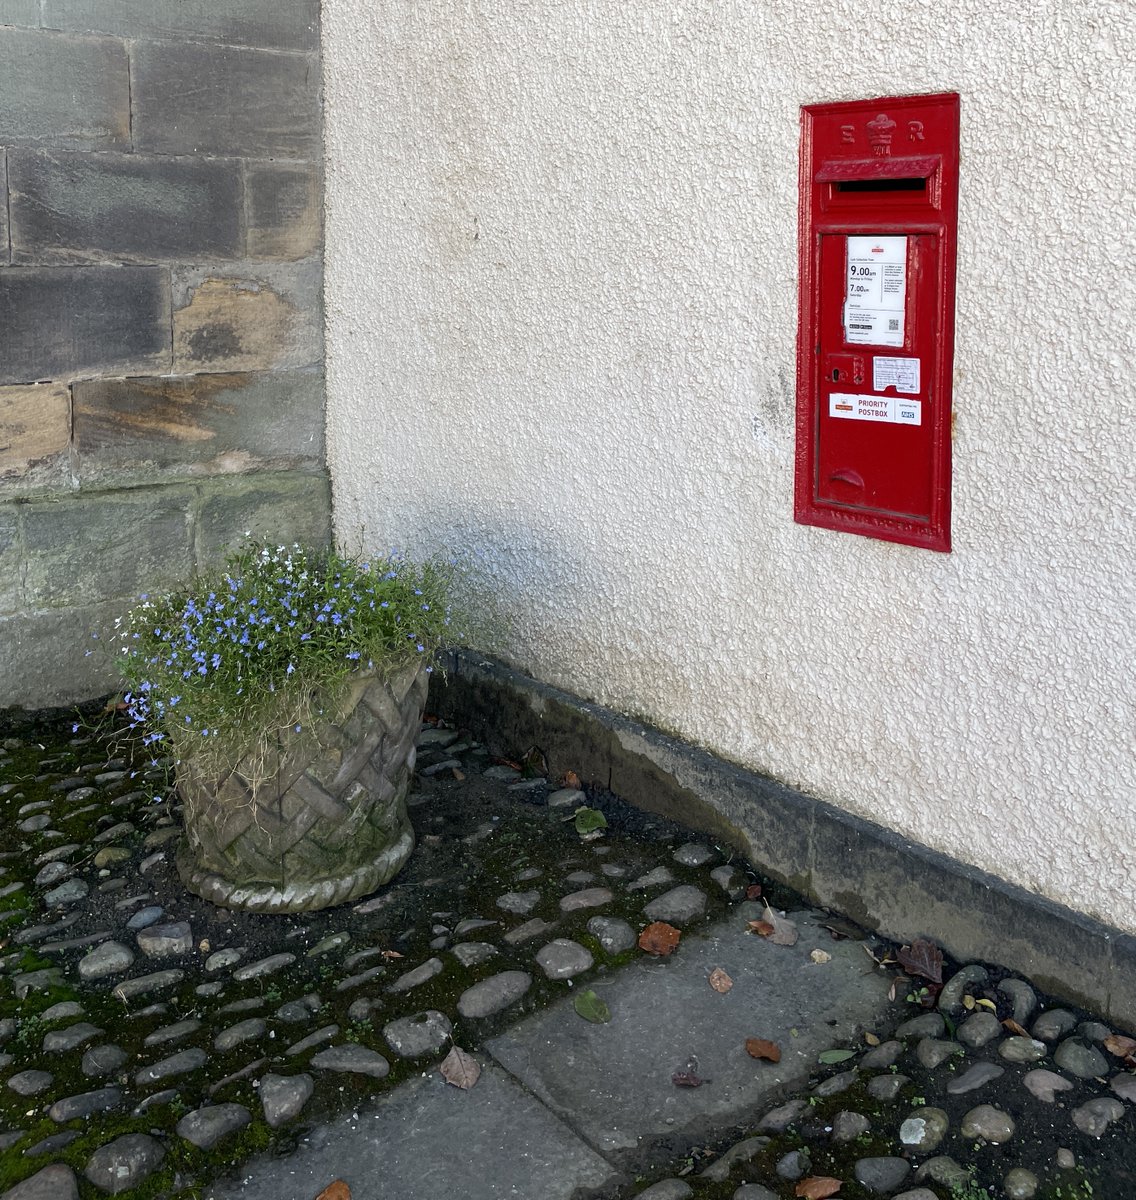 Hidden corner with #PostboxSaturday opportunity while visiting the amazing delights of @aucklandproject this week.